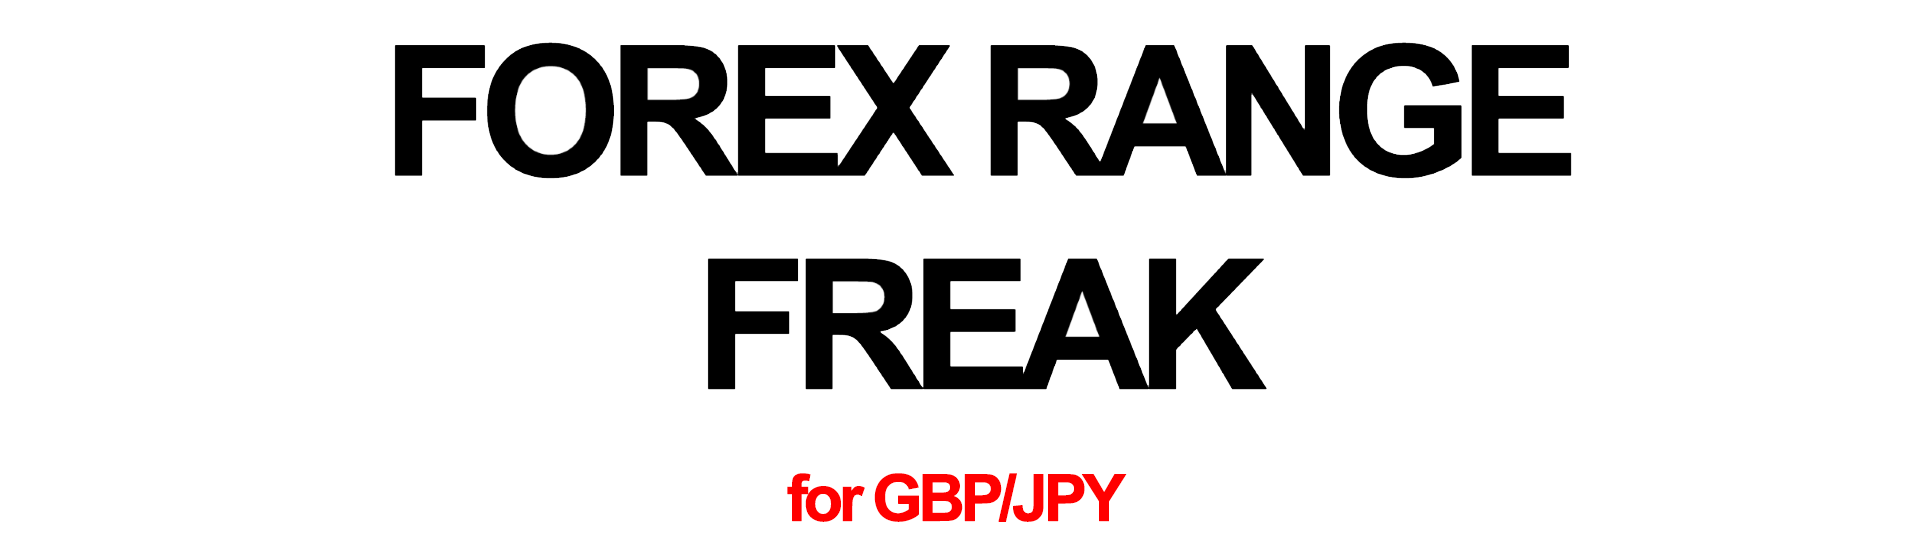 forexrangefreakgbpjpytitle.png